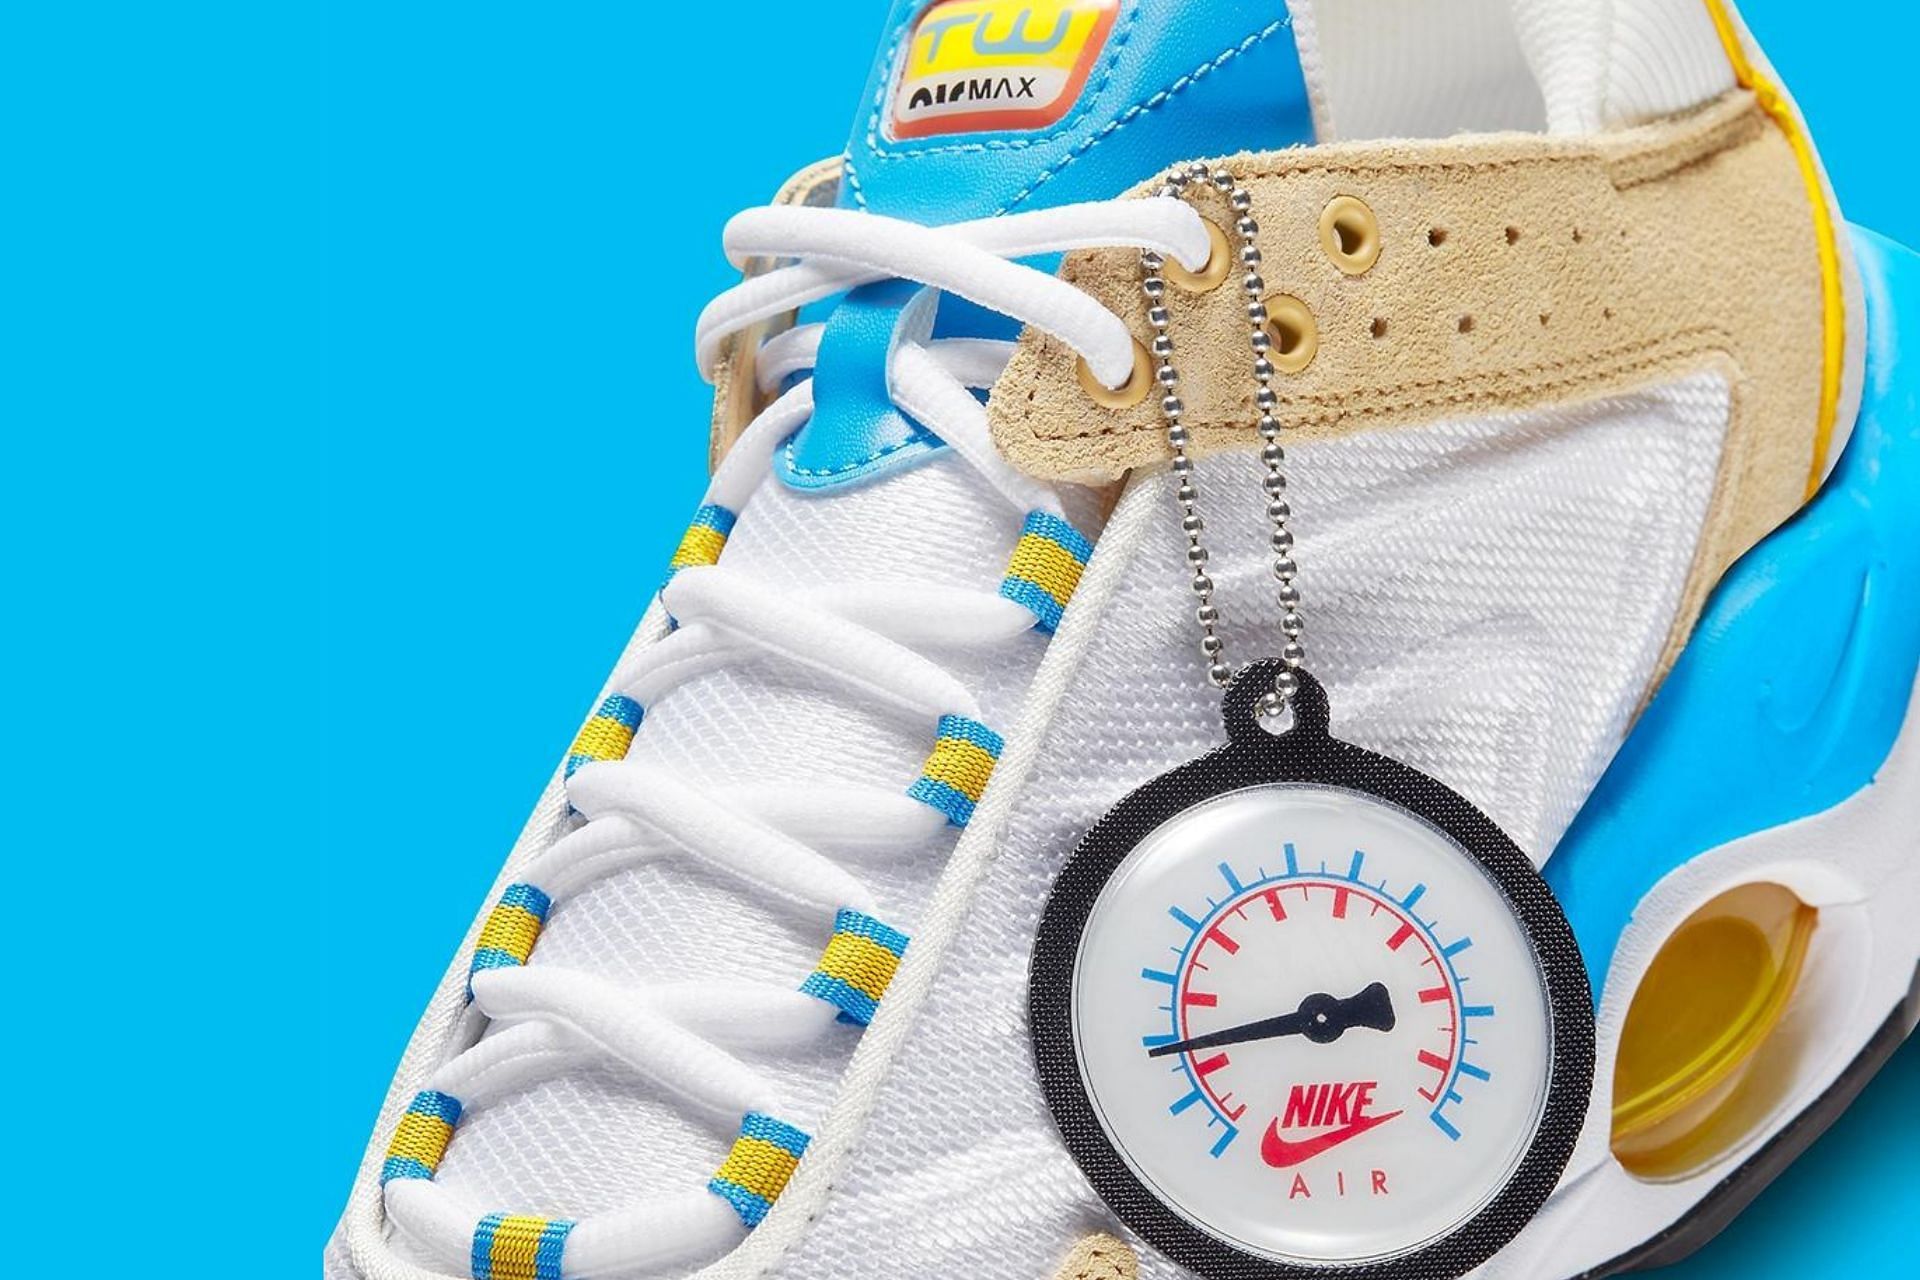 Take a closer look at the tongue areas of the shoes (Image via Nike)